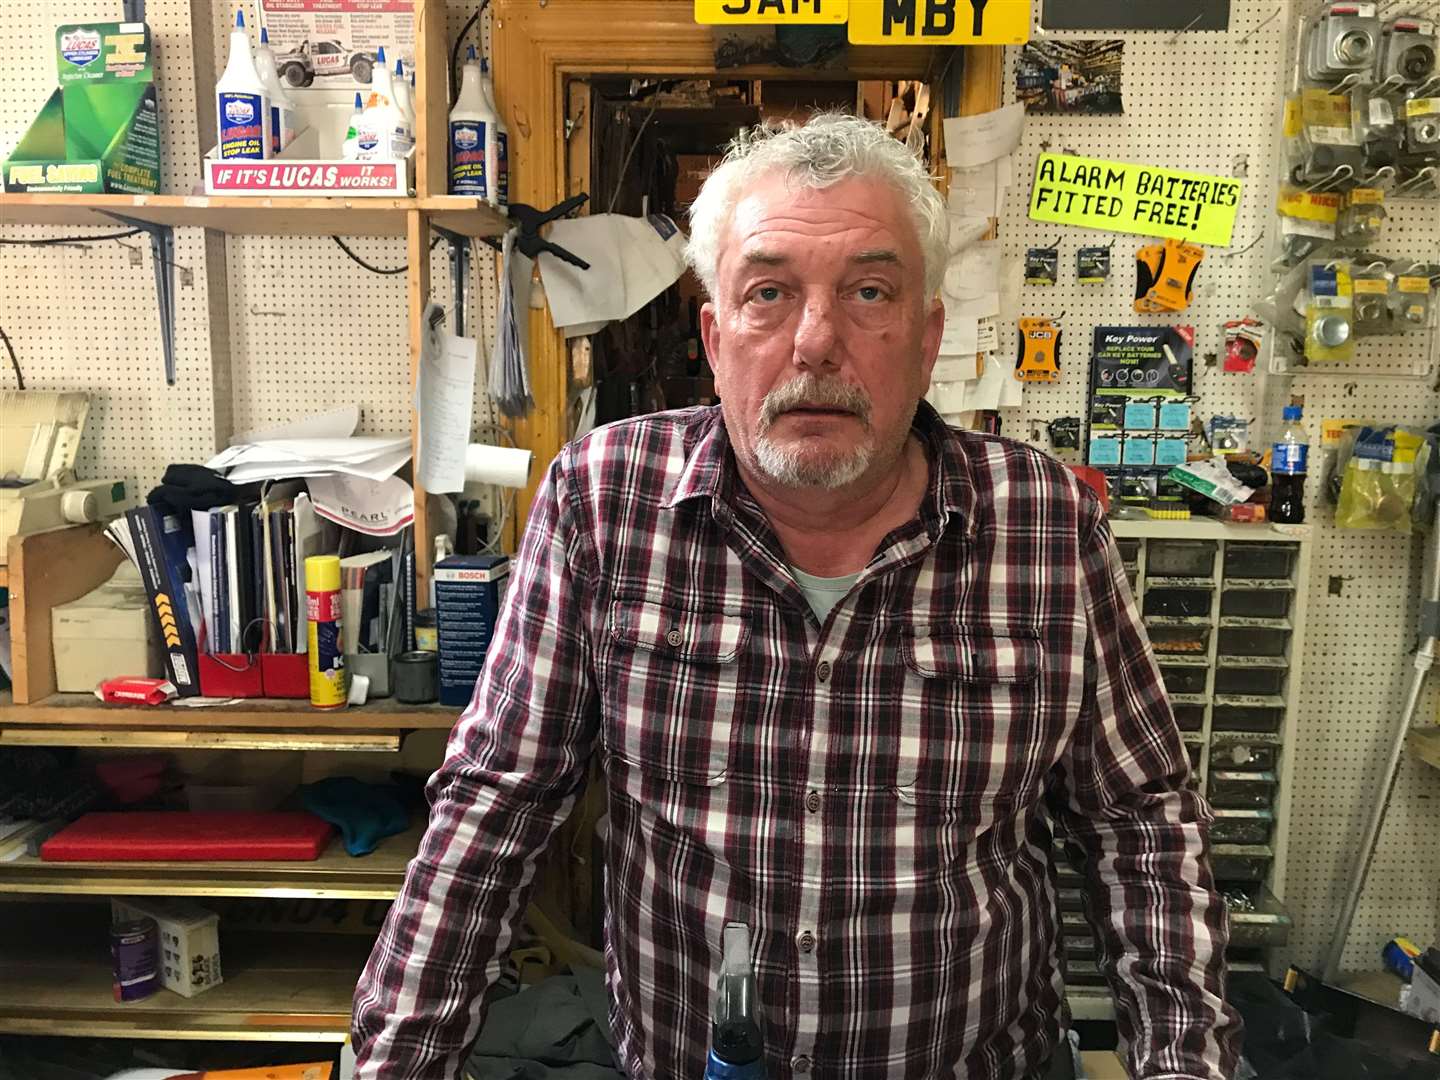 The owner of the shop, Lance Middlebrooke (9213106)